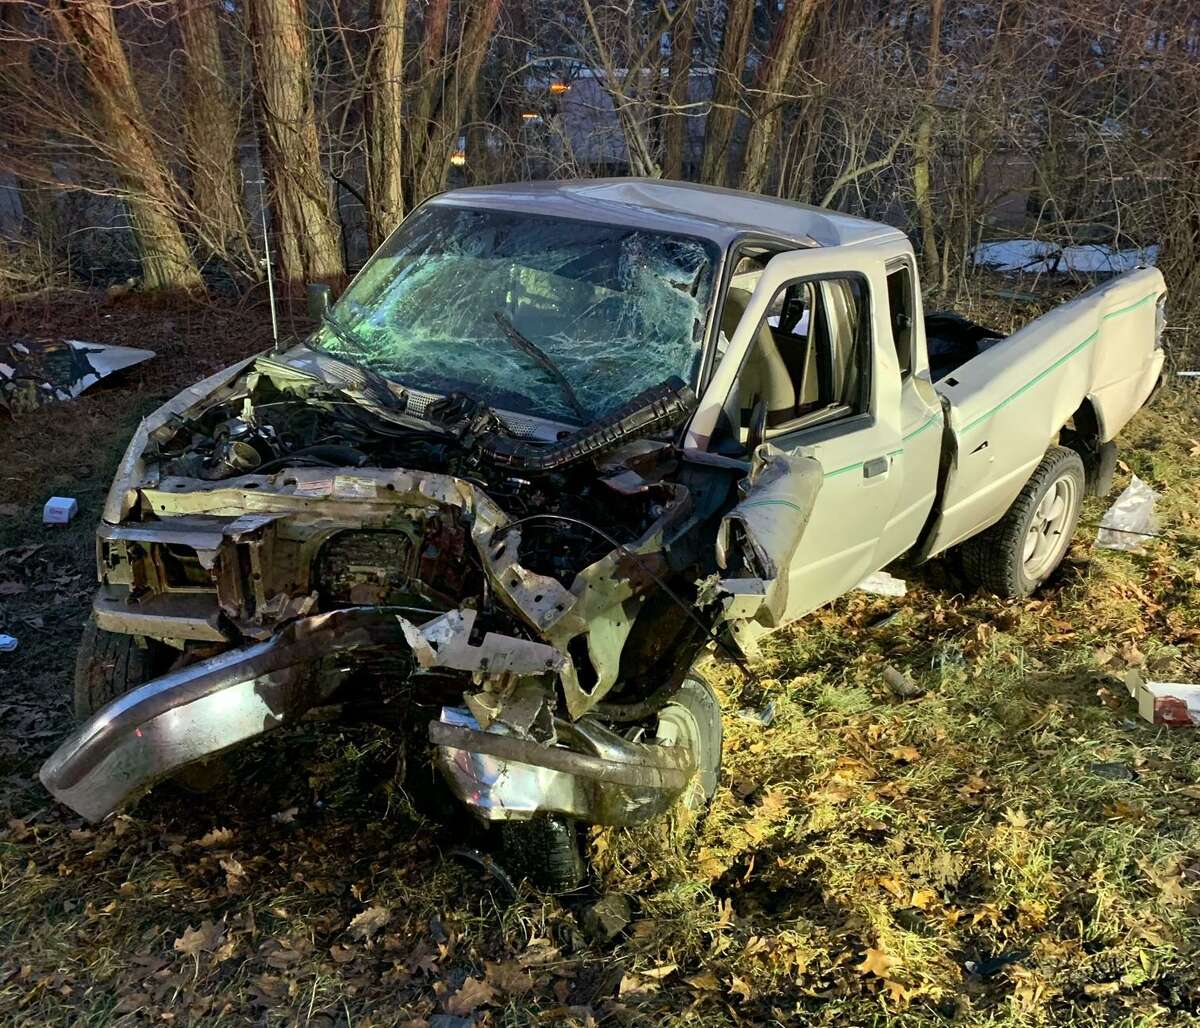 Shelton fire officials said this pickup truck was involved in an accident on Route 8 Friday, Feb. 26.